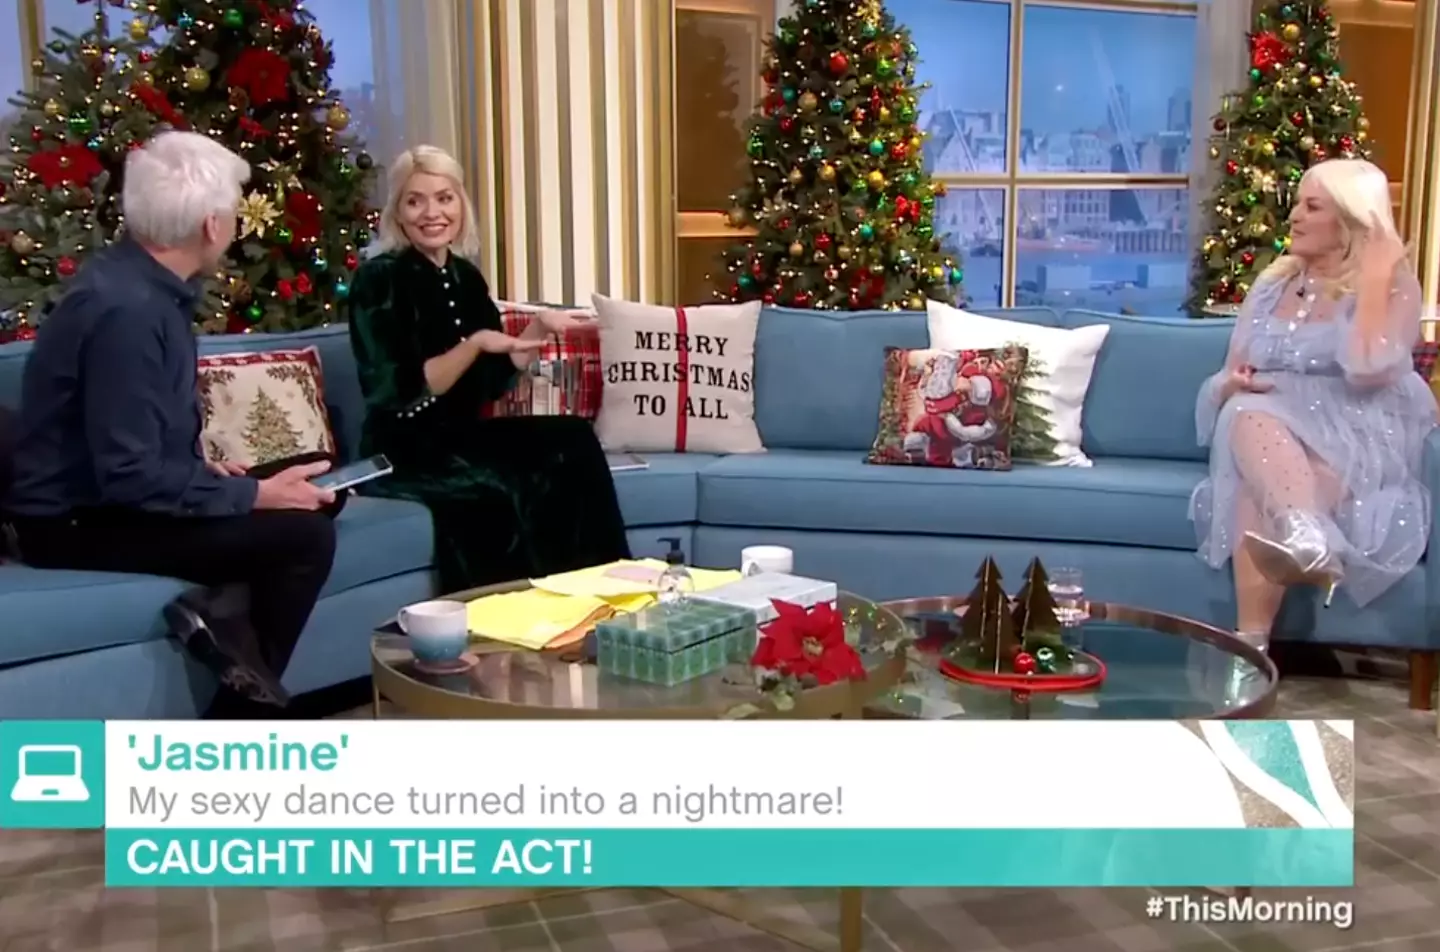 Holly looked rather embarrassed and laughed the whole thing off, but viewers at home thought it was hilarious (